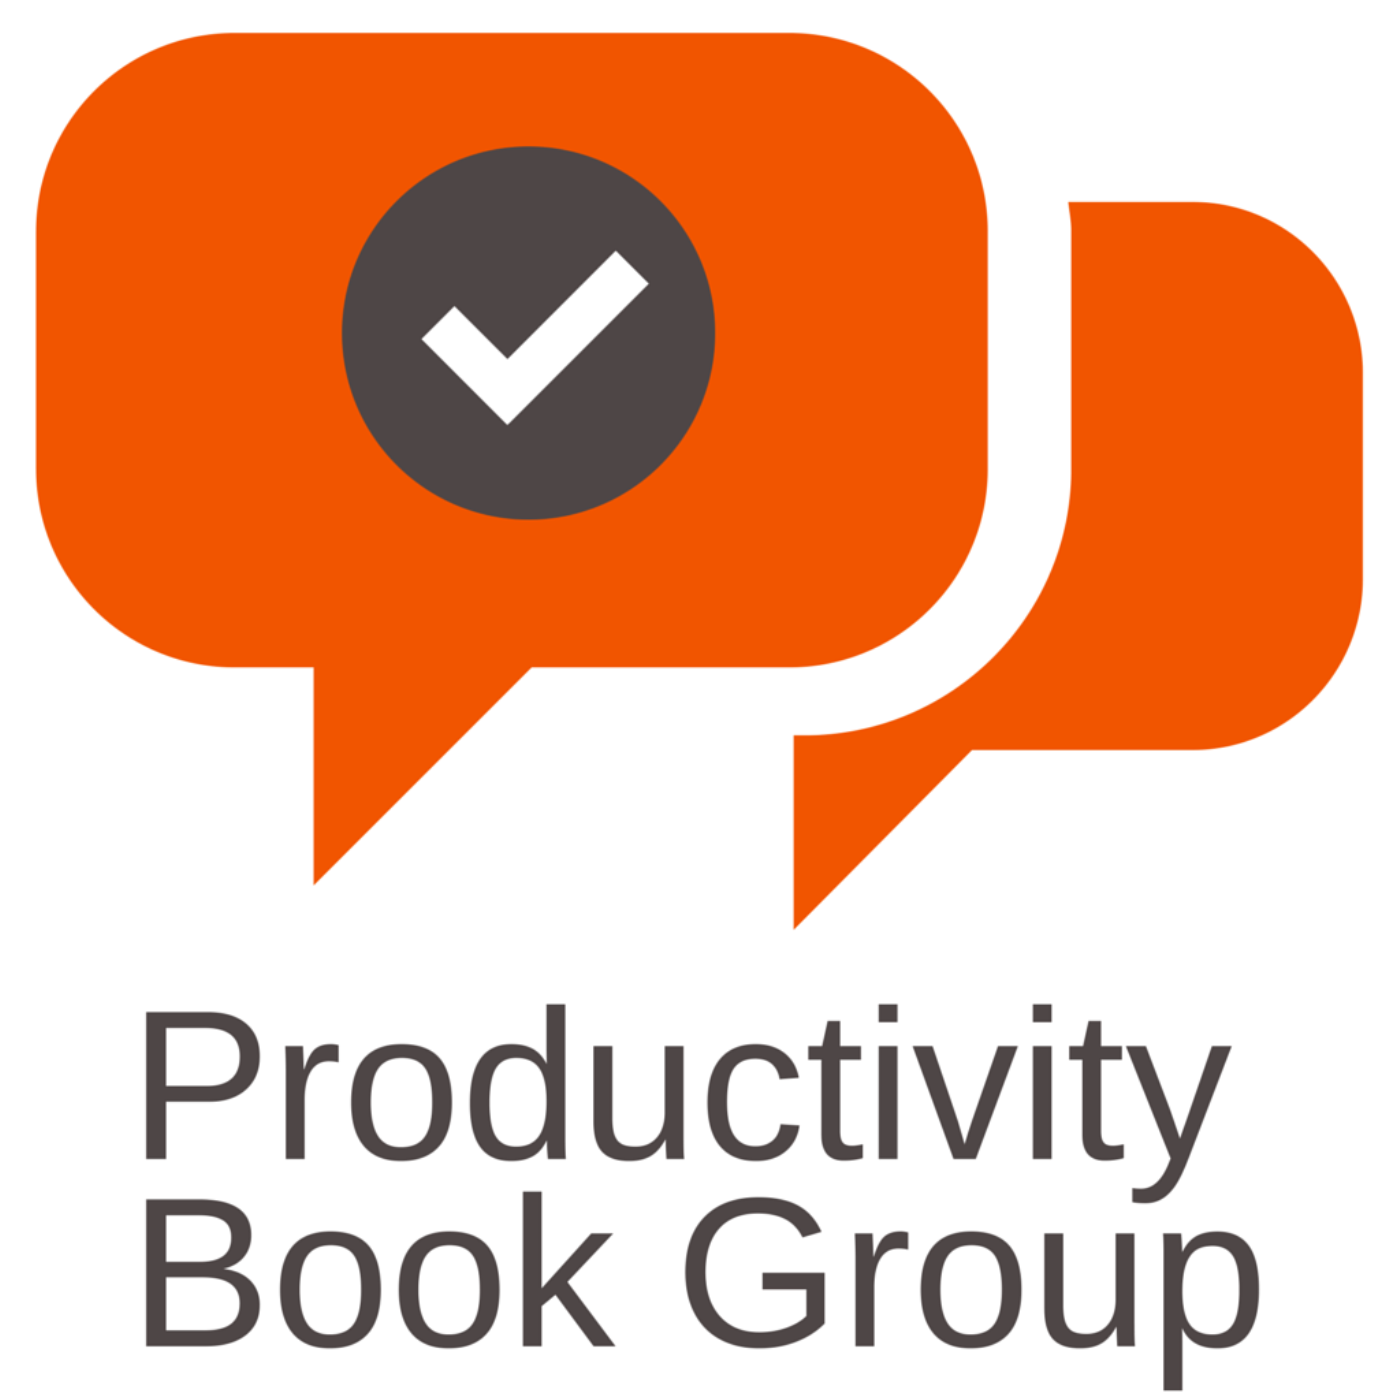 Productivity Book Group